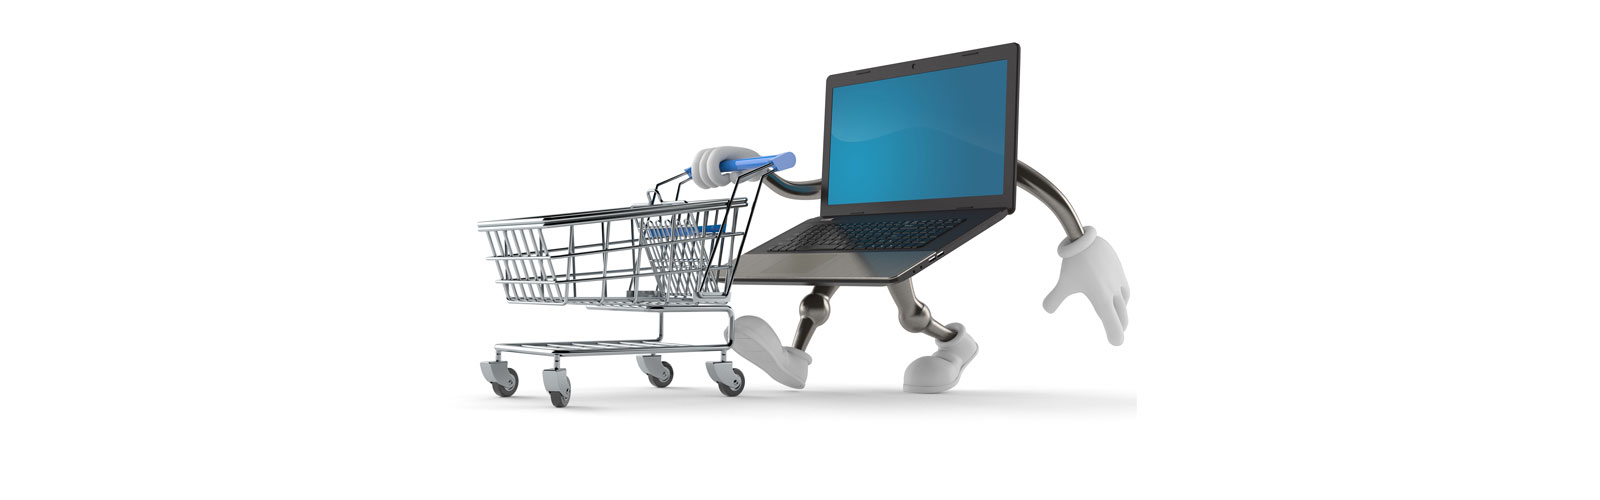 A laptop with arms and legs pushing a shopping cart